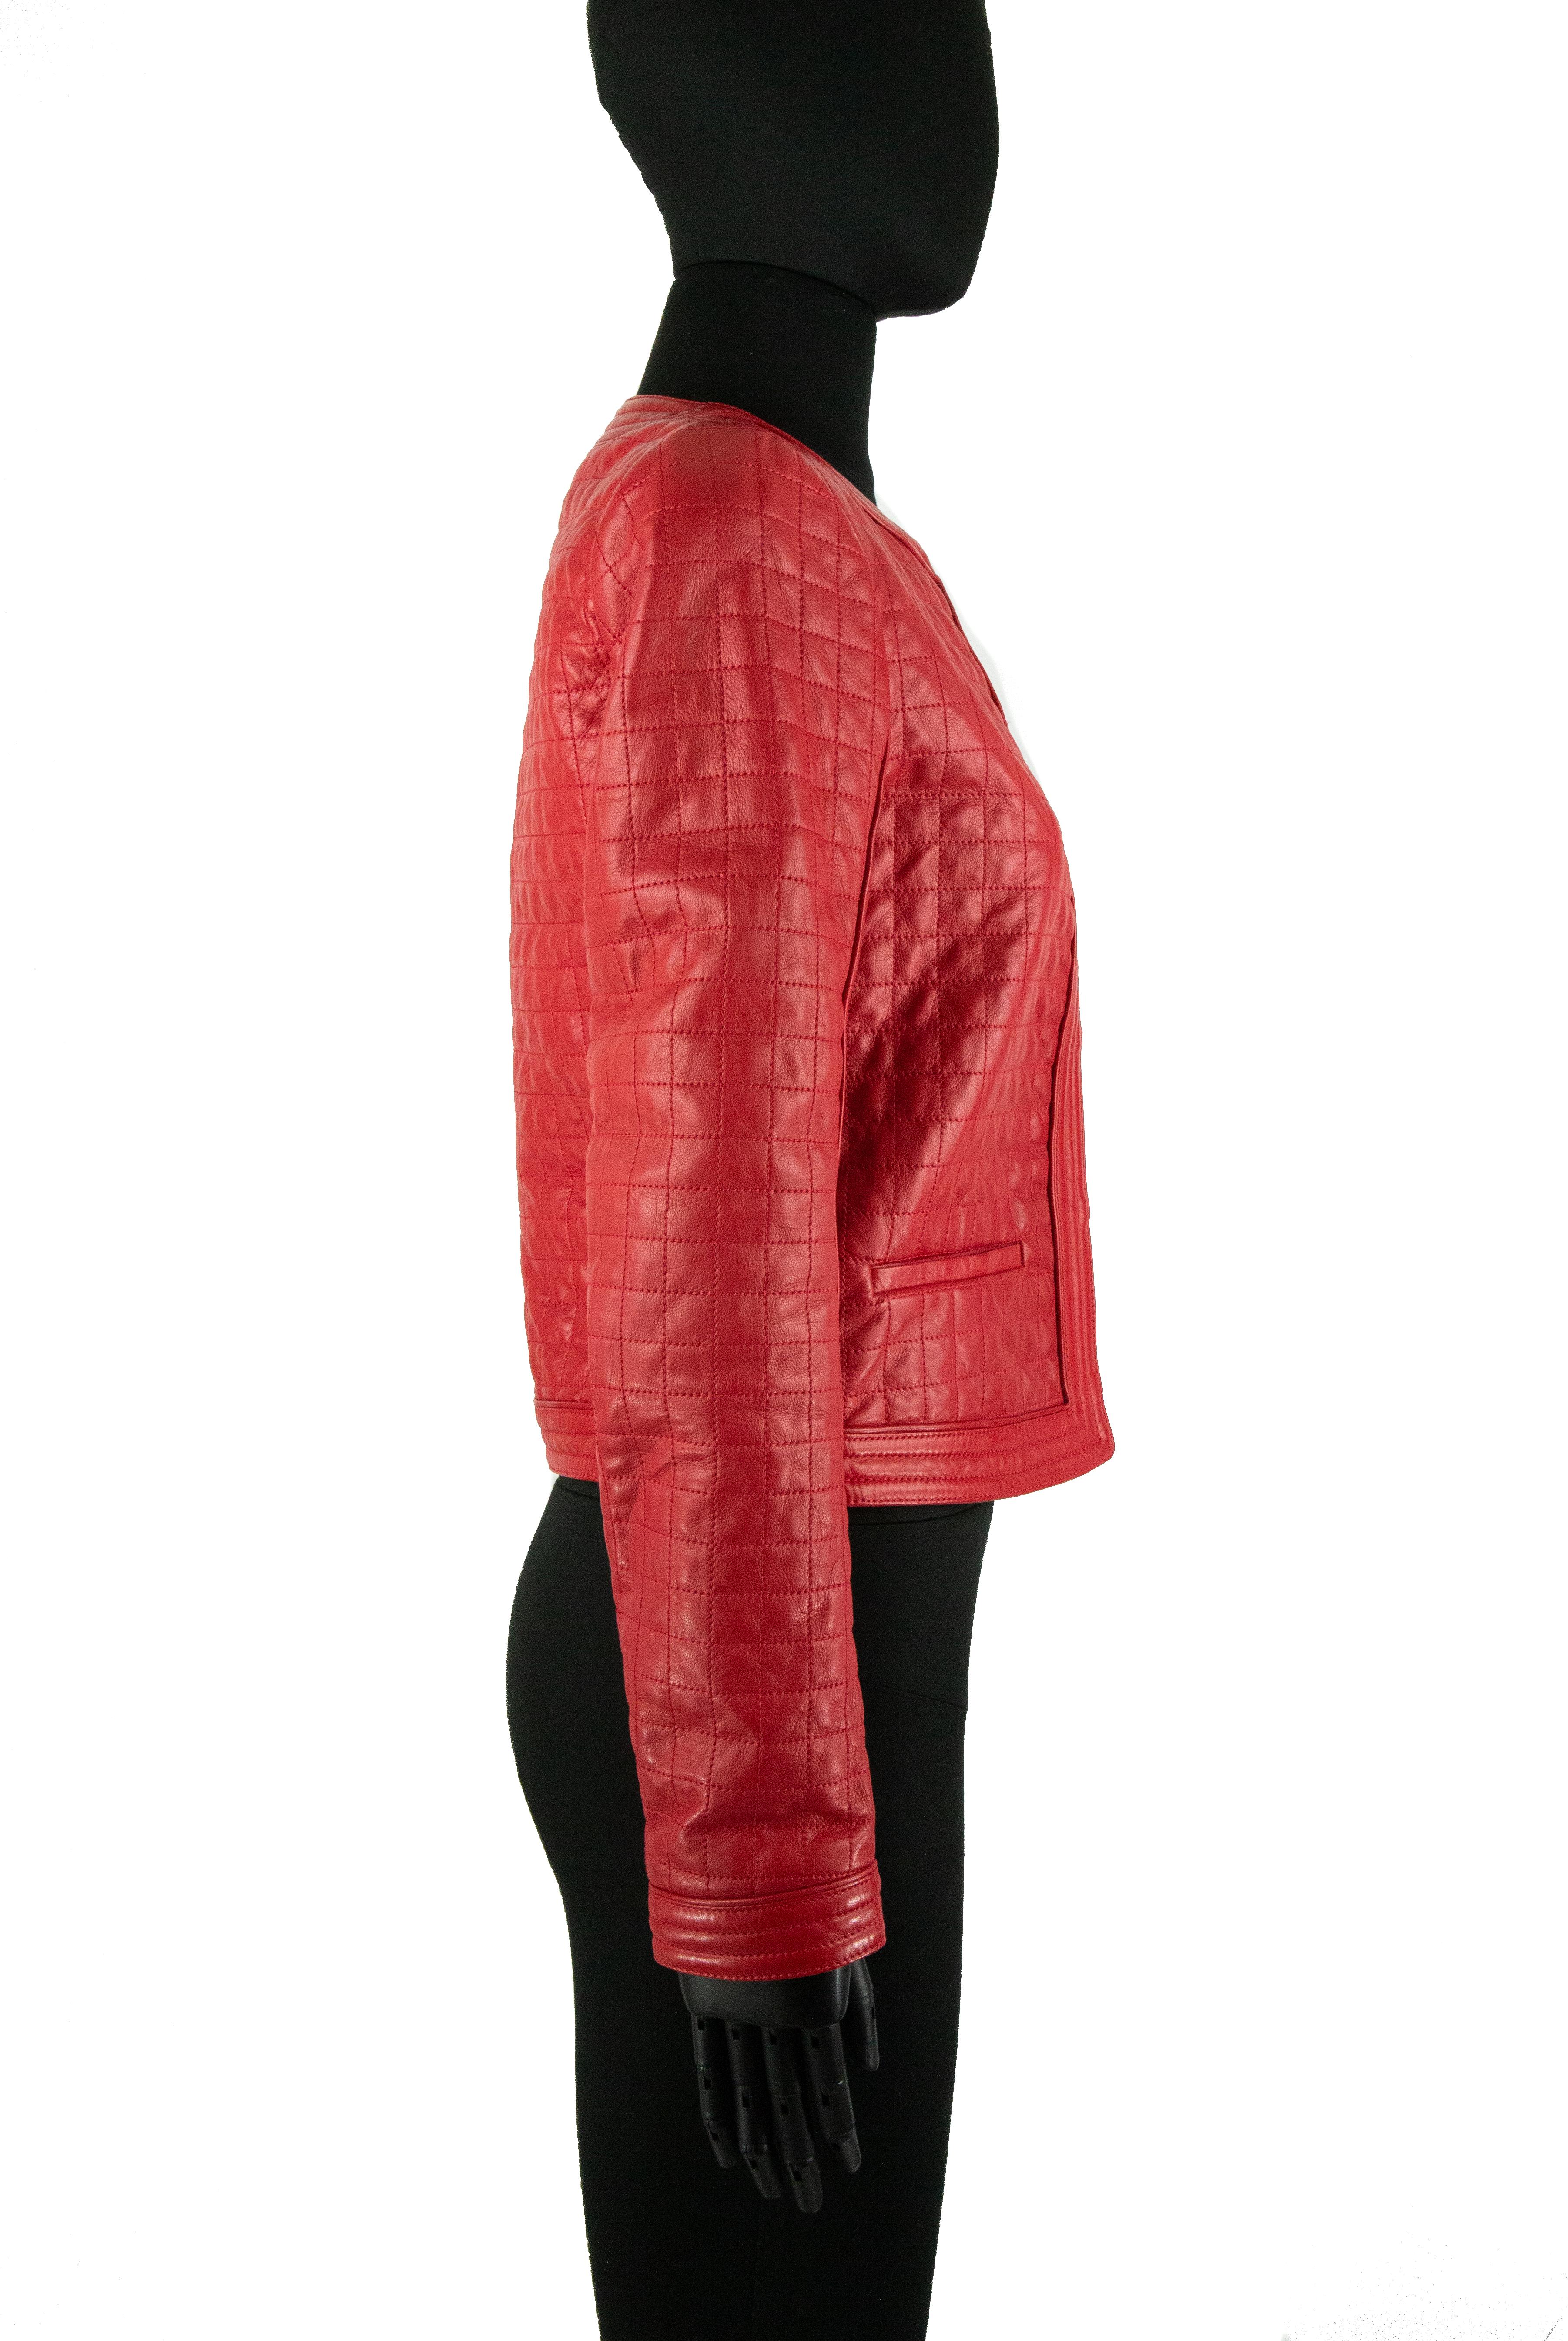 Roberto Cavalli Red Leather Jacket In Good Condition In London, GB